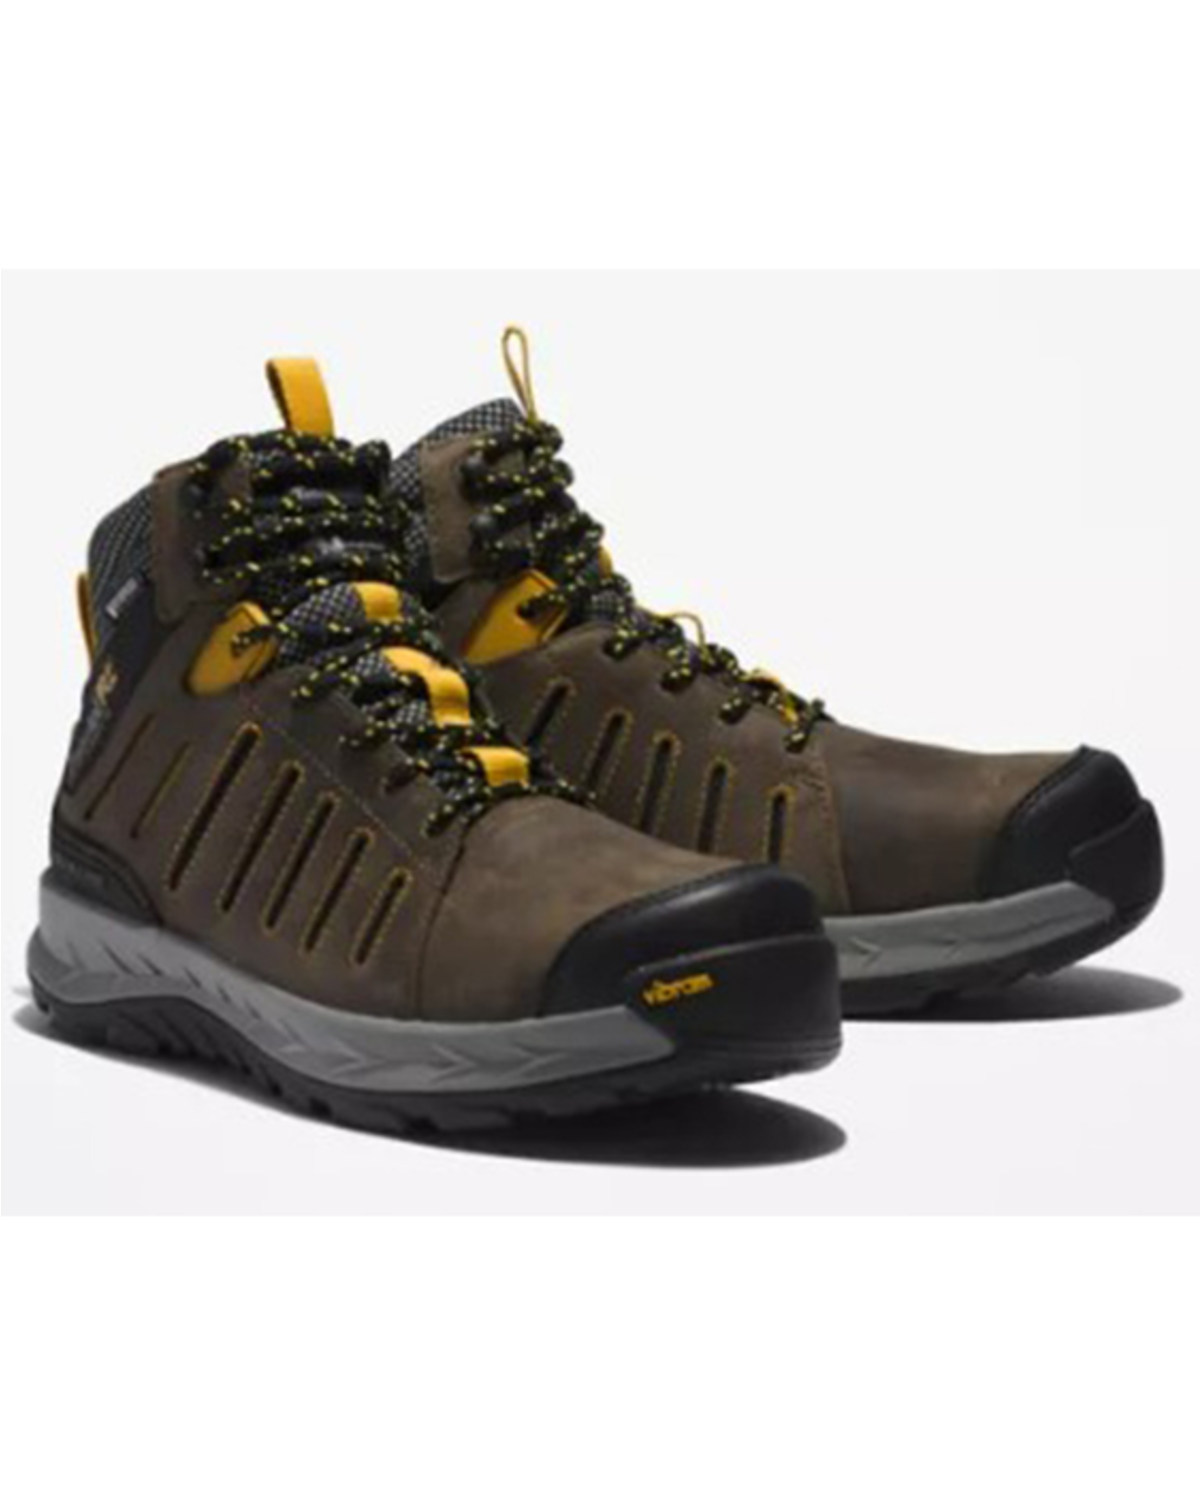 Timberland Men's Waterproof Lace-Up Work Boots - Composite Toe